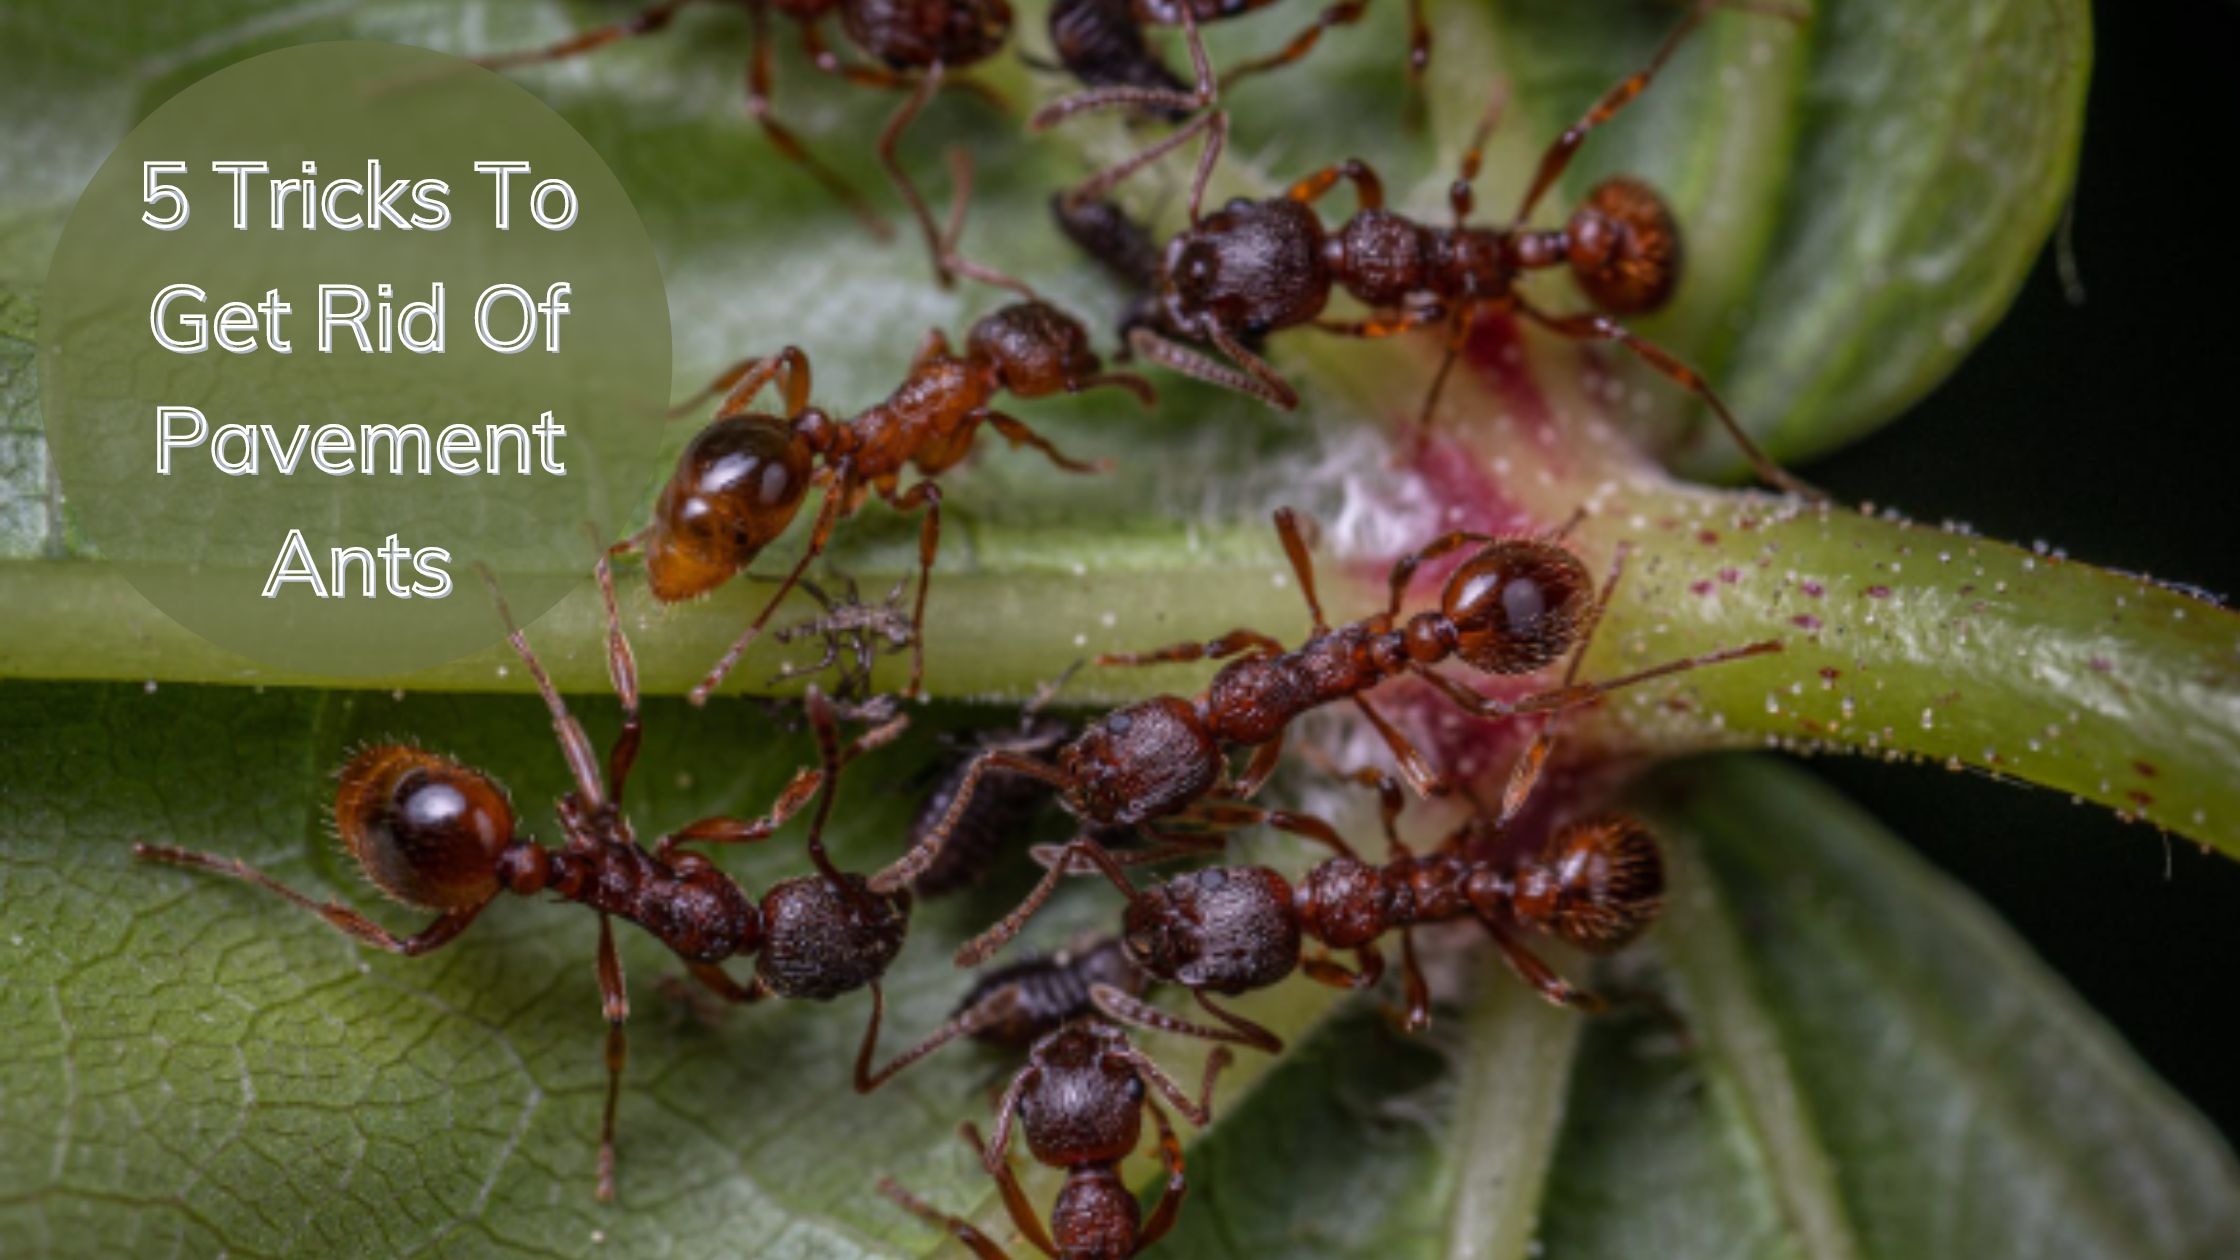 5 Tricks To Get Rid Of Pavement Ants